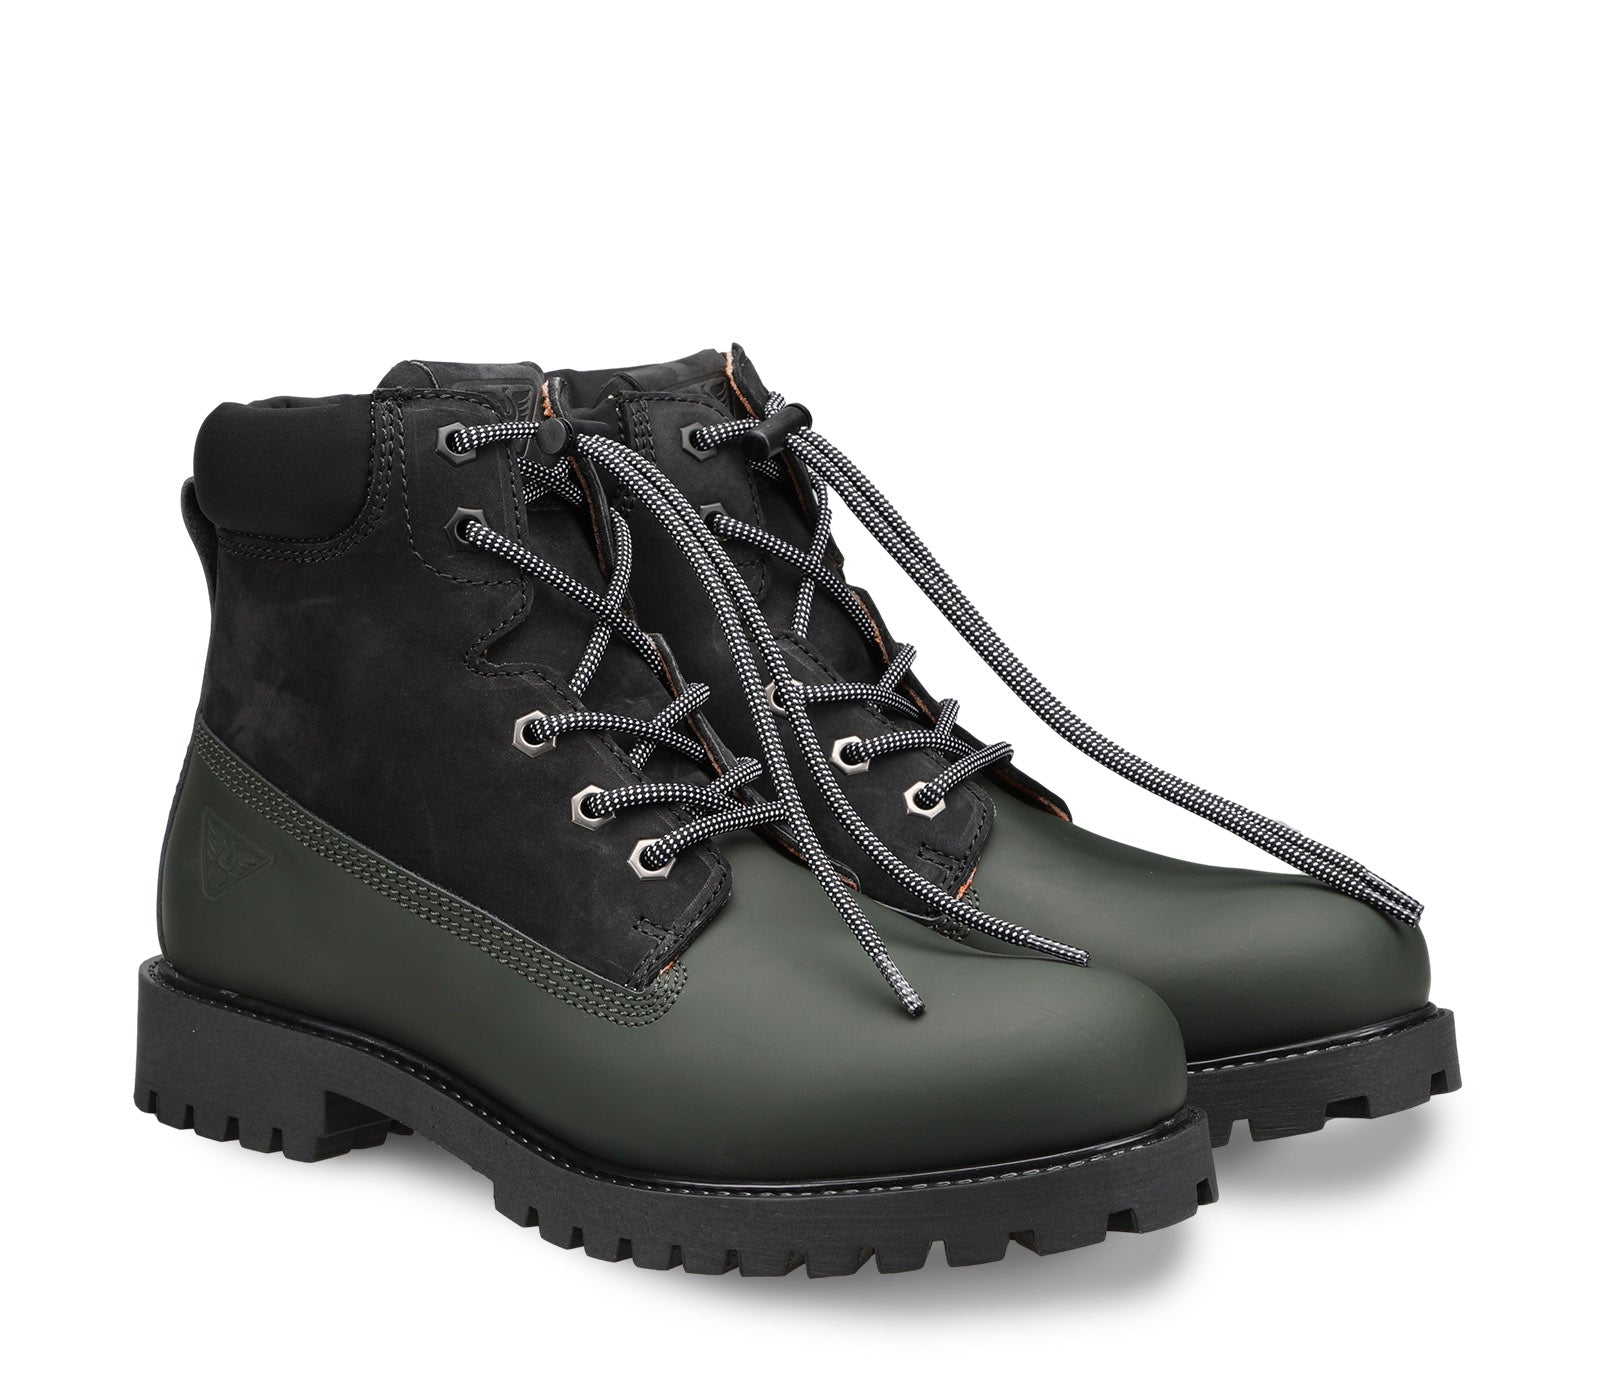 Green Men's Rubberized Leather Boot with Cord-Stopper Closure